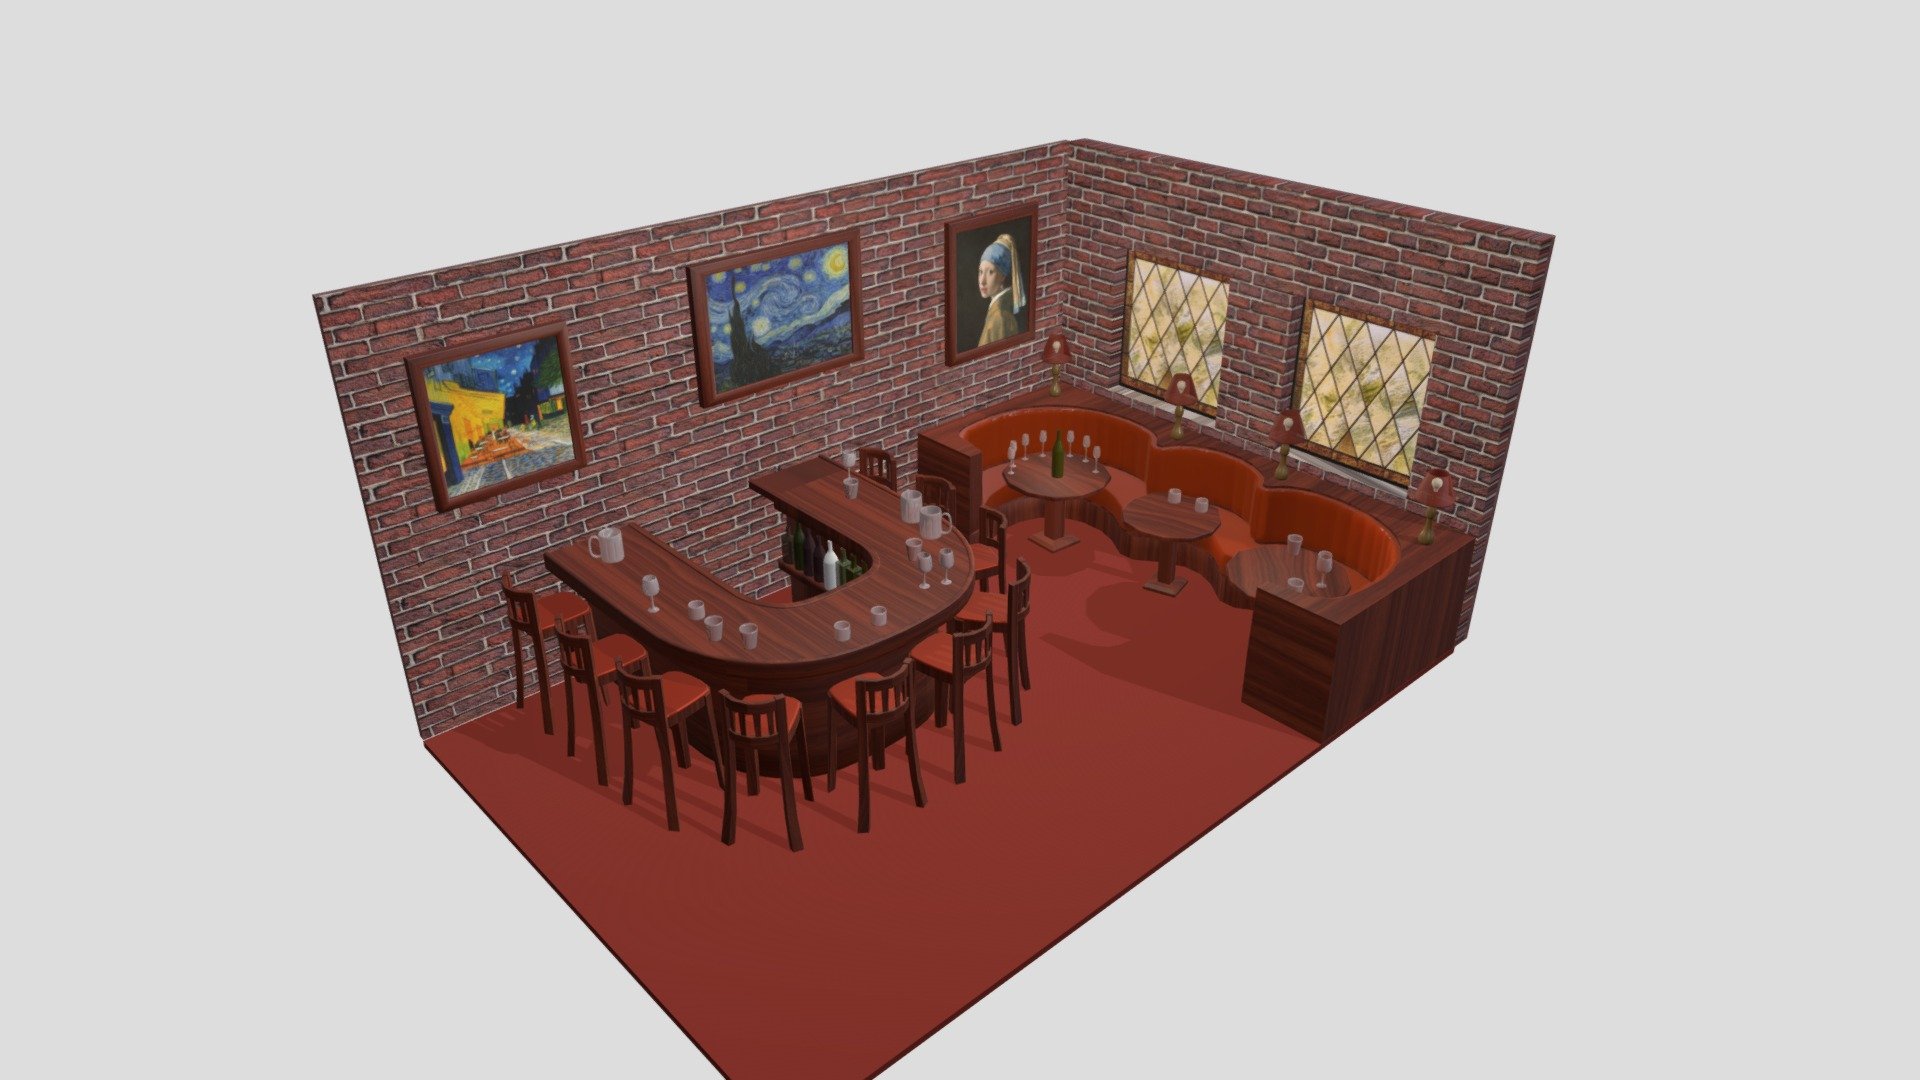 Loosely modeled after Nick's bar from the show New Girl. 

(there are a couple objects that I forgot to remove when exporting the file, so I made the material opacity on them 0%, but they're still technically there) 
(also I did not create most of the textures) - Classic Bar - Download Free 3D model by nasser3 3d model